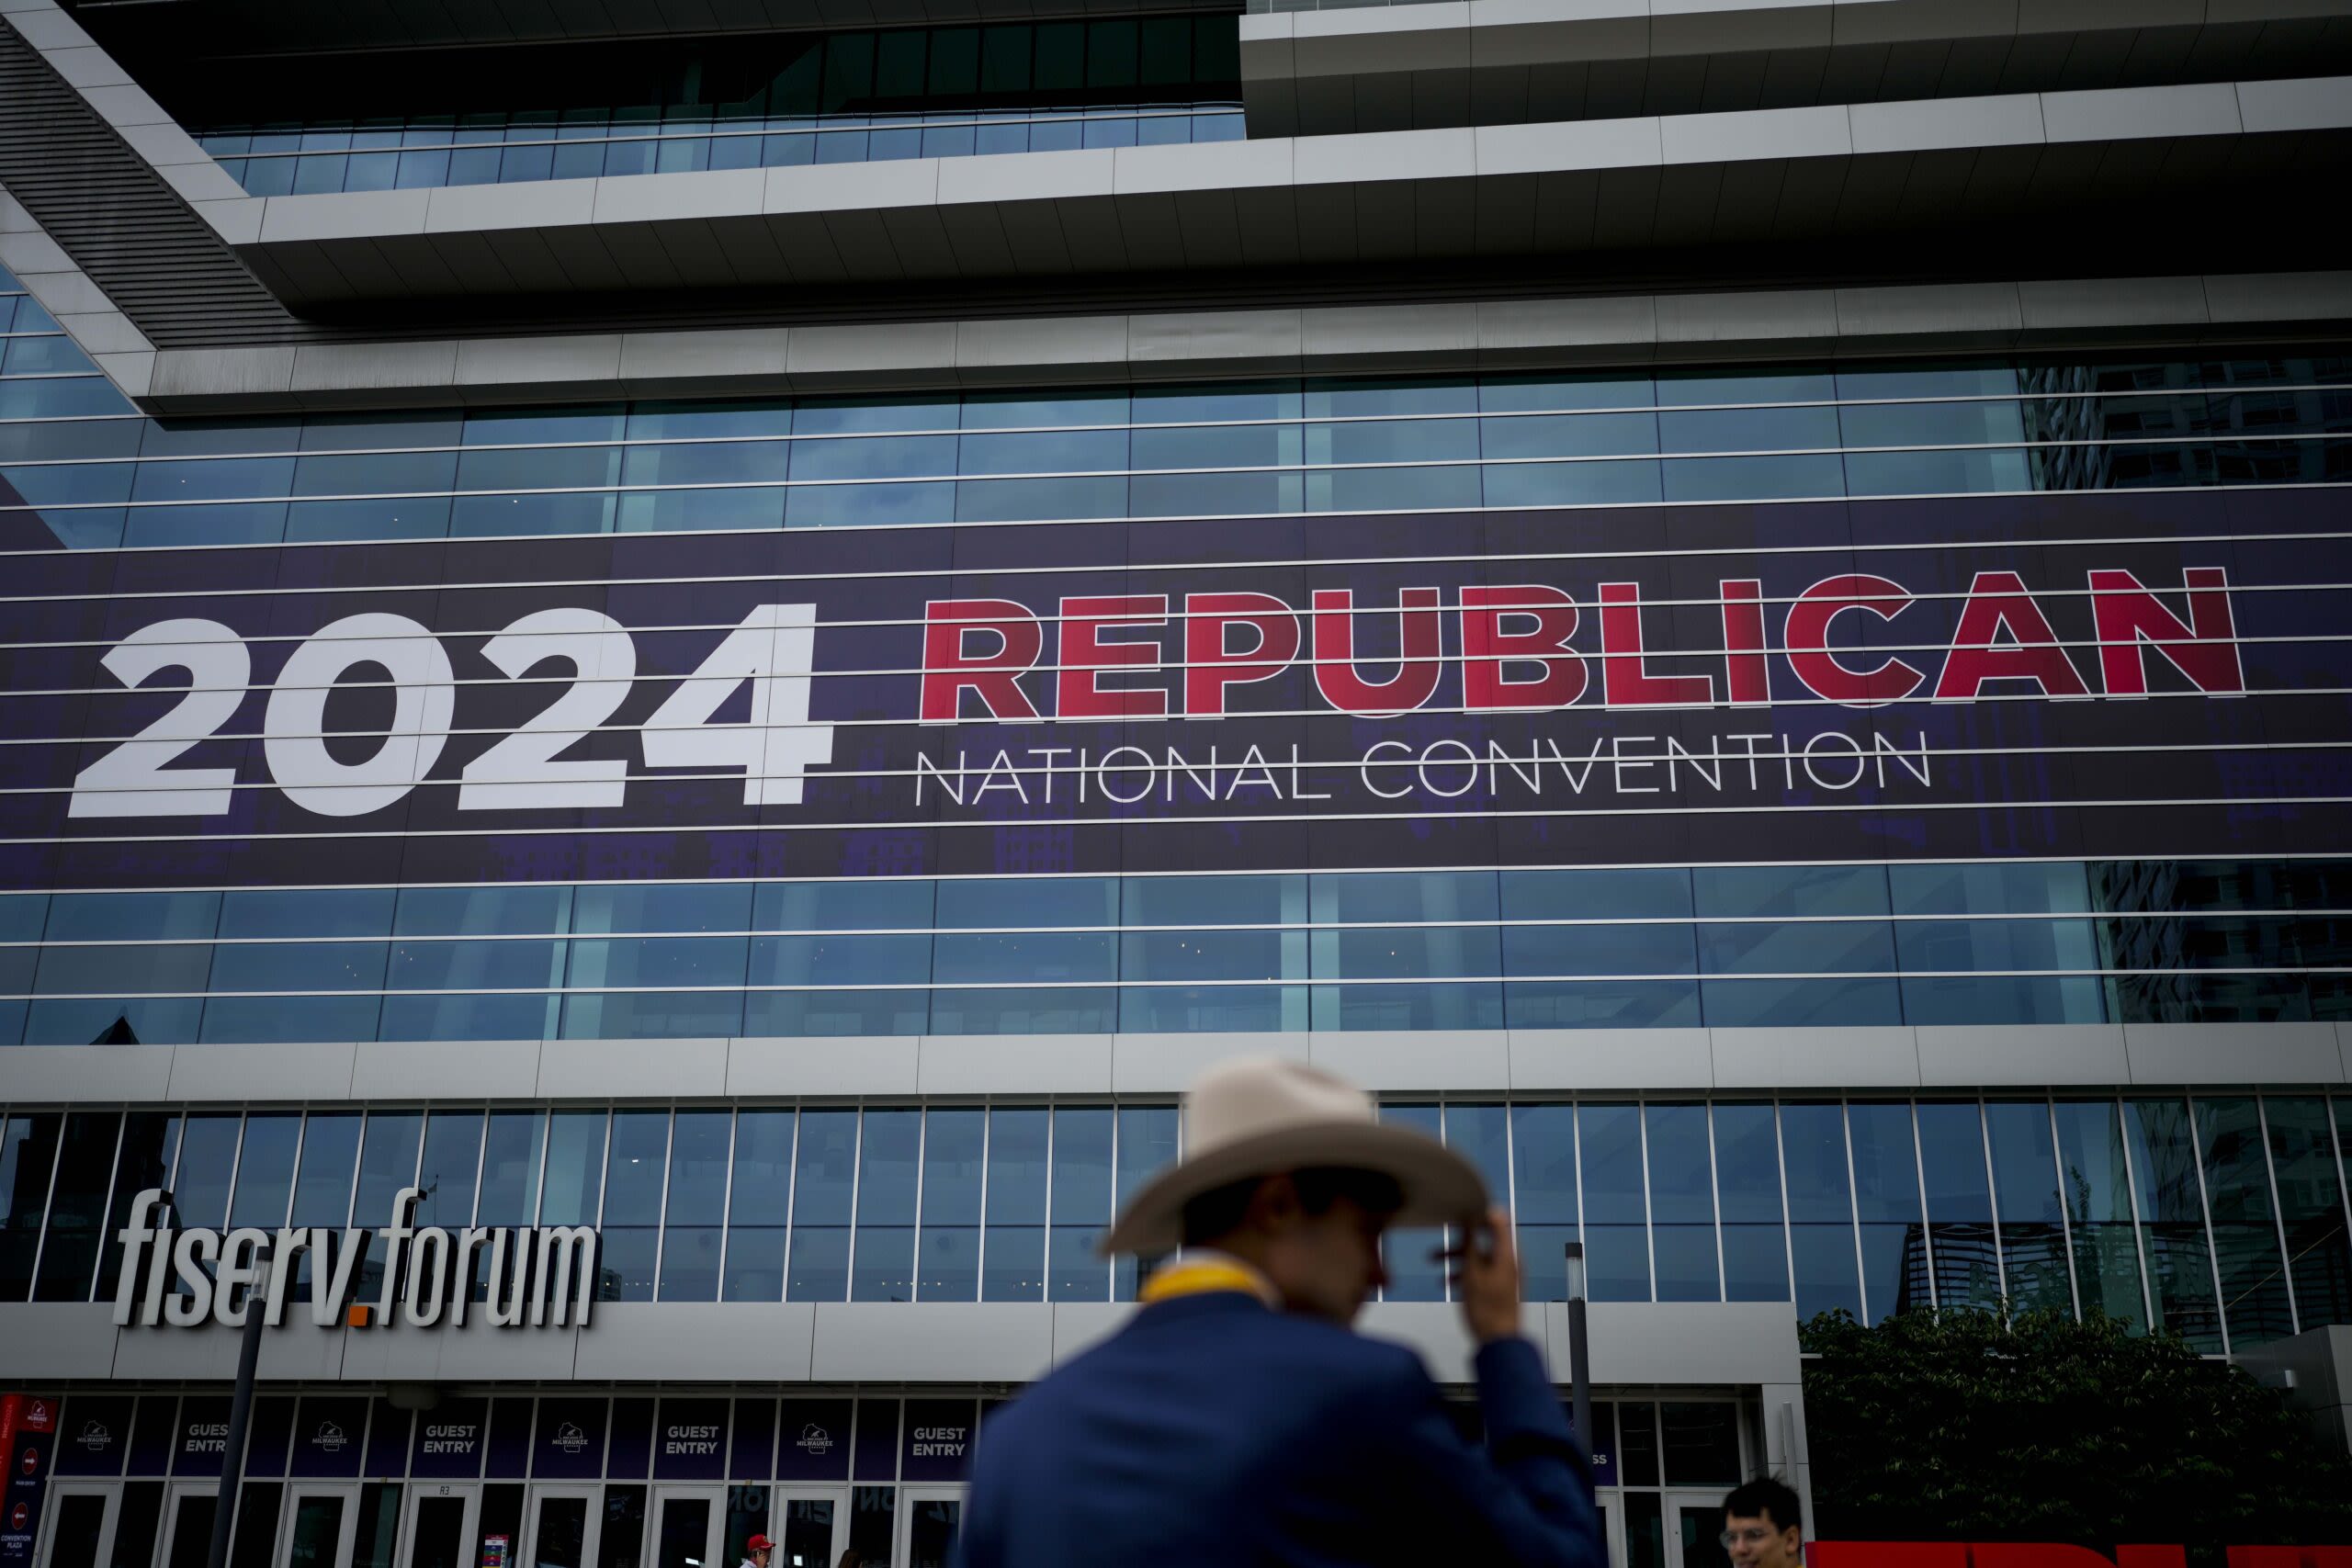 Man Allegedly Brandishing Knives Shot By Cops Near Republican National Convention: Report